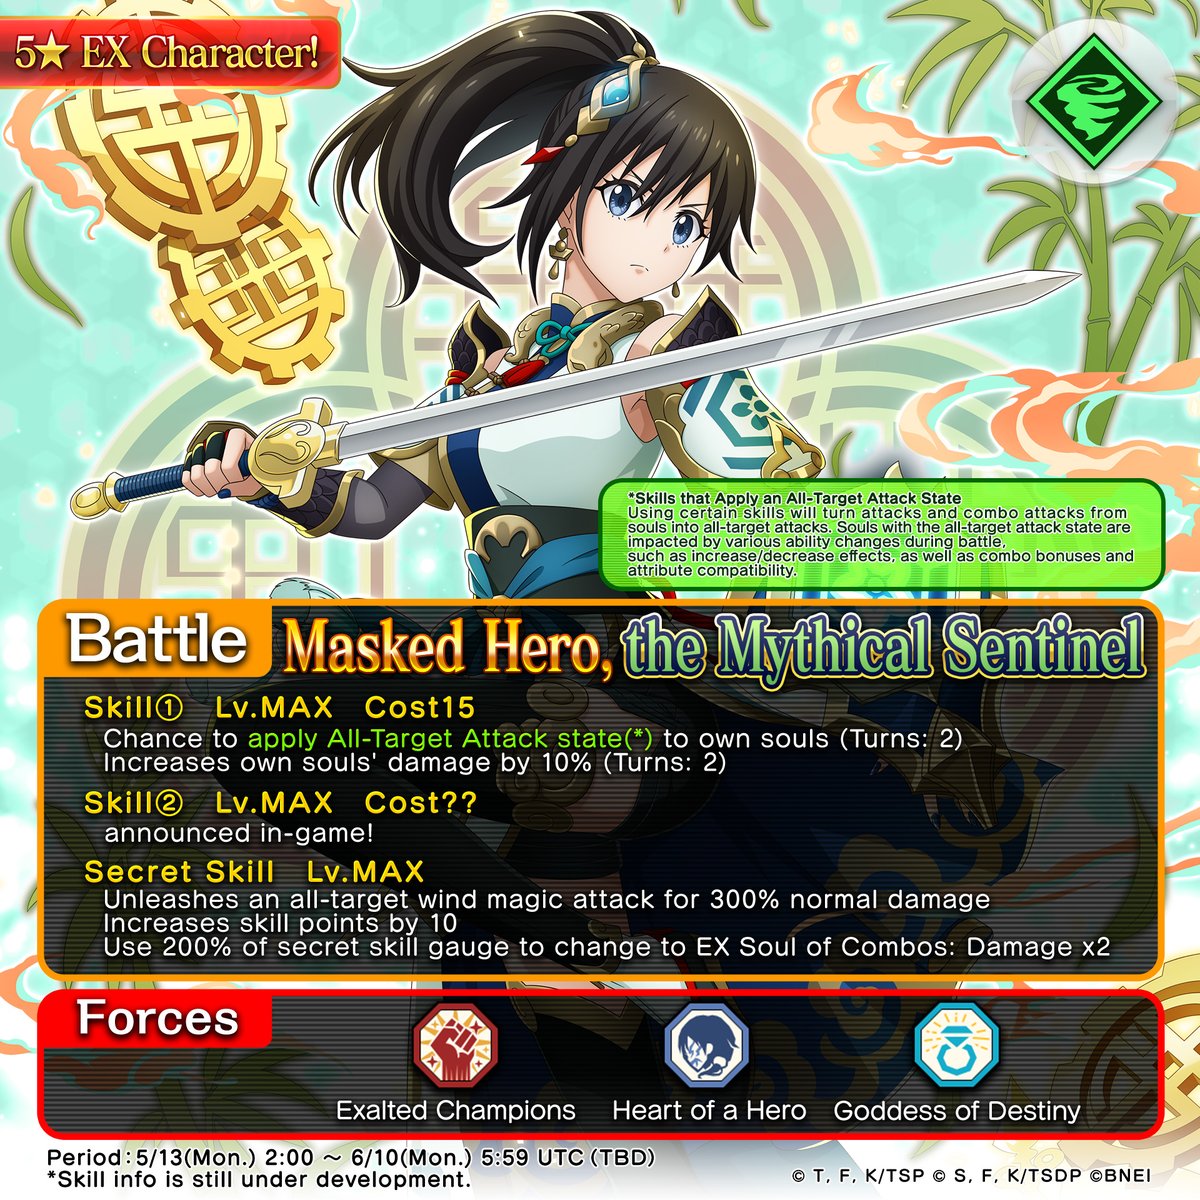 Notice
Events Starting 5/13 (Mon) 2:00 UTC!🎉
 
🐉Troop Recruit: 2.5th Anniversary Super Isekai Revelry Part 4🐉

The new Masked Hero appears at a higher rate than usual!🌟
 
#SlimeIM #tensura